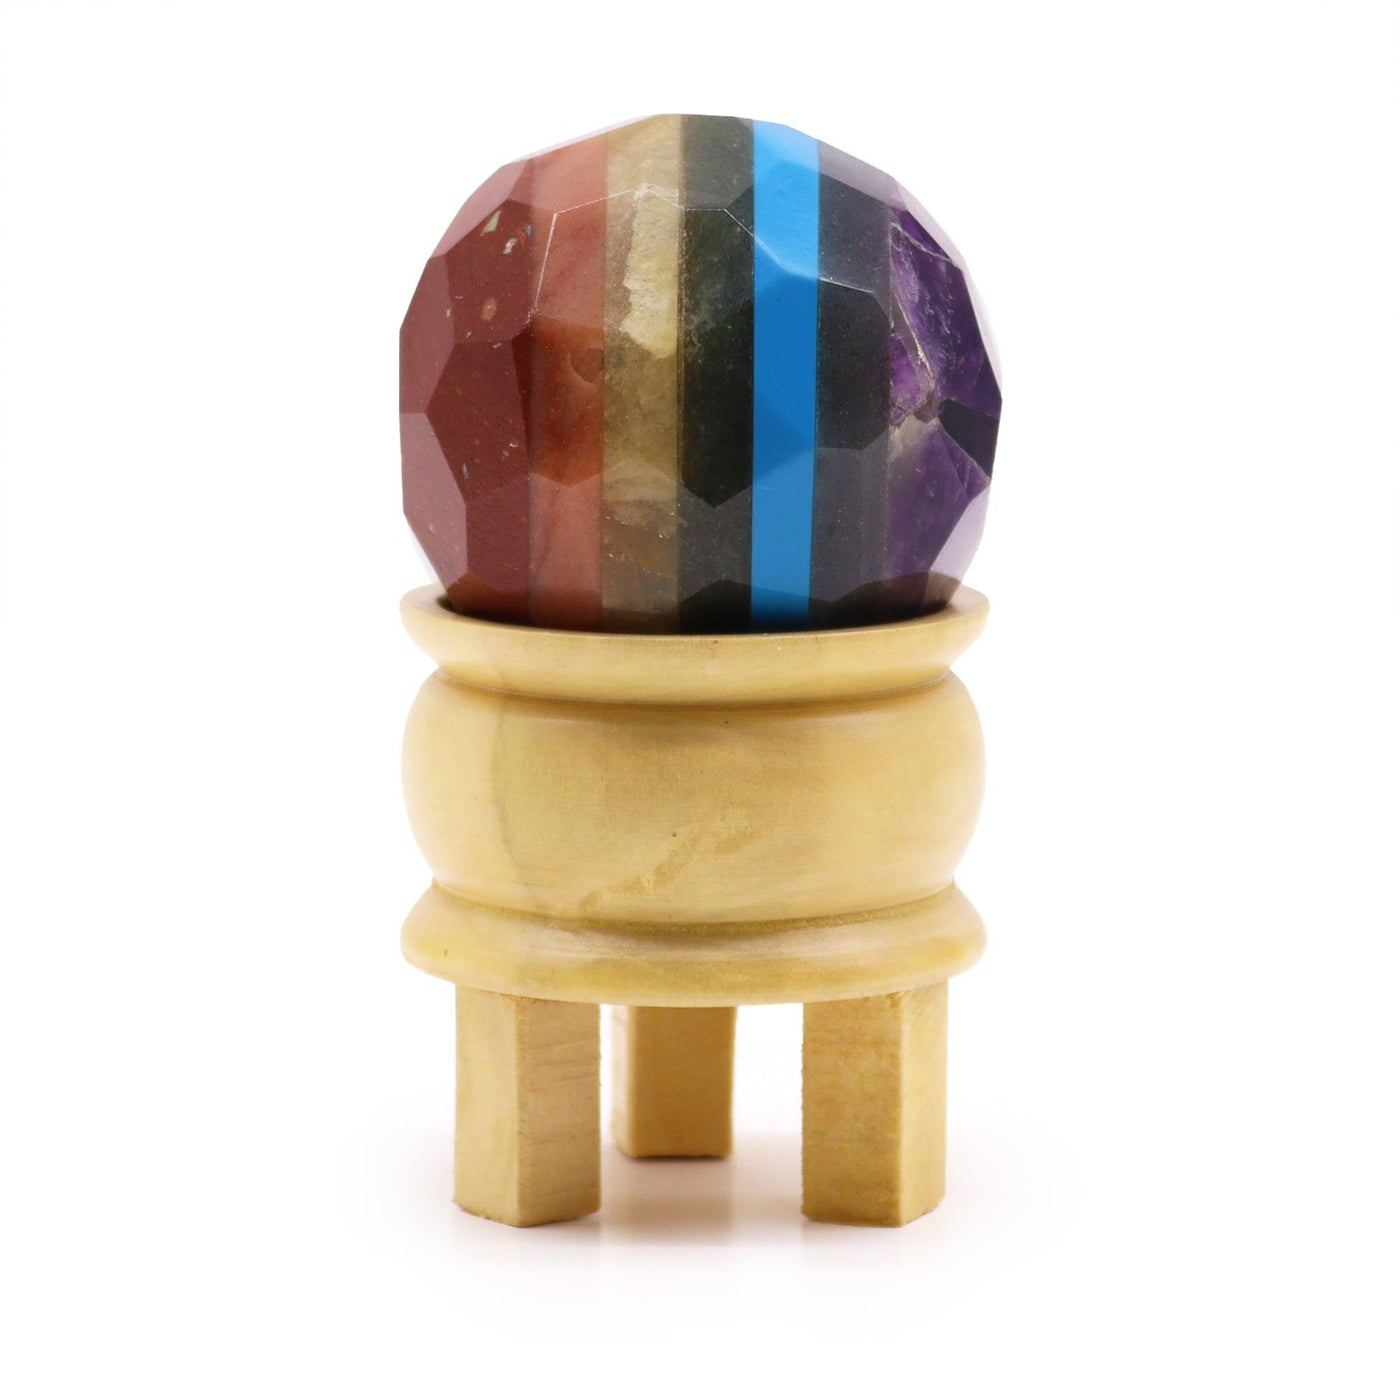 Healing Chakra Natural Gemstone Faceted Ball Ornament With Wooden Stand. 